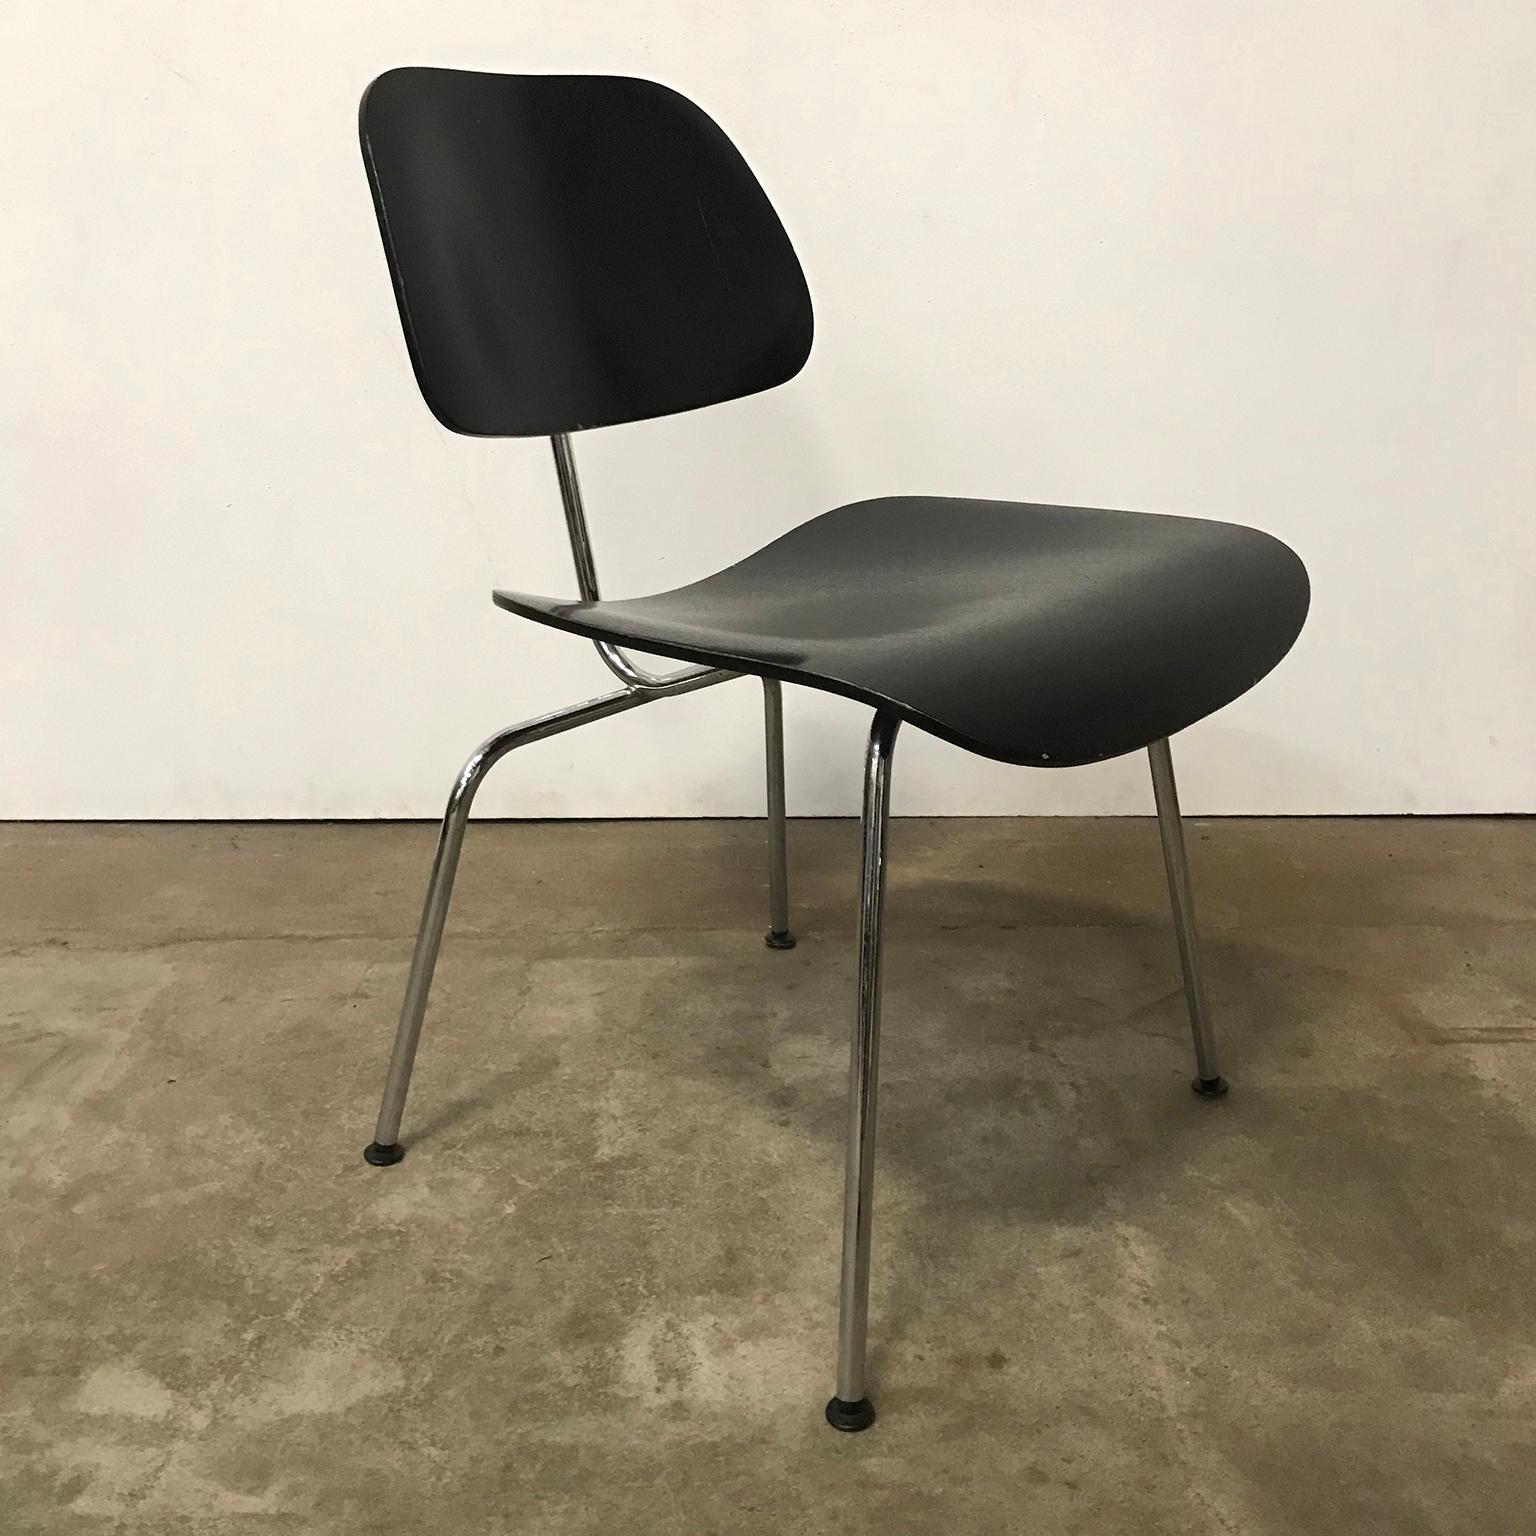 Three DCM chairs in black by Eames produced by Vitra. Priced per piece. The chairs show some traces of wear like some loss of paint, some scratches and tiny damages of the seat and back, like shown on the pictures. Also some minor spots on the